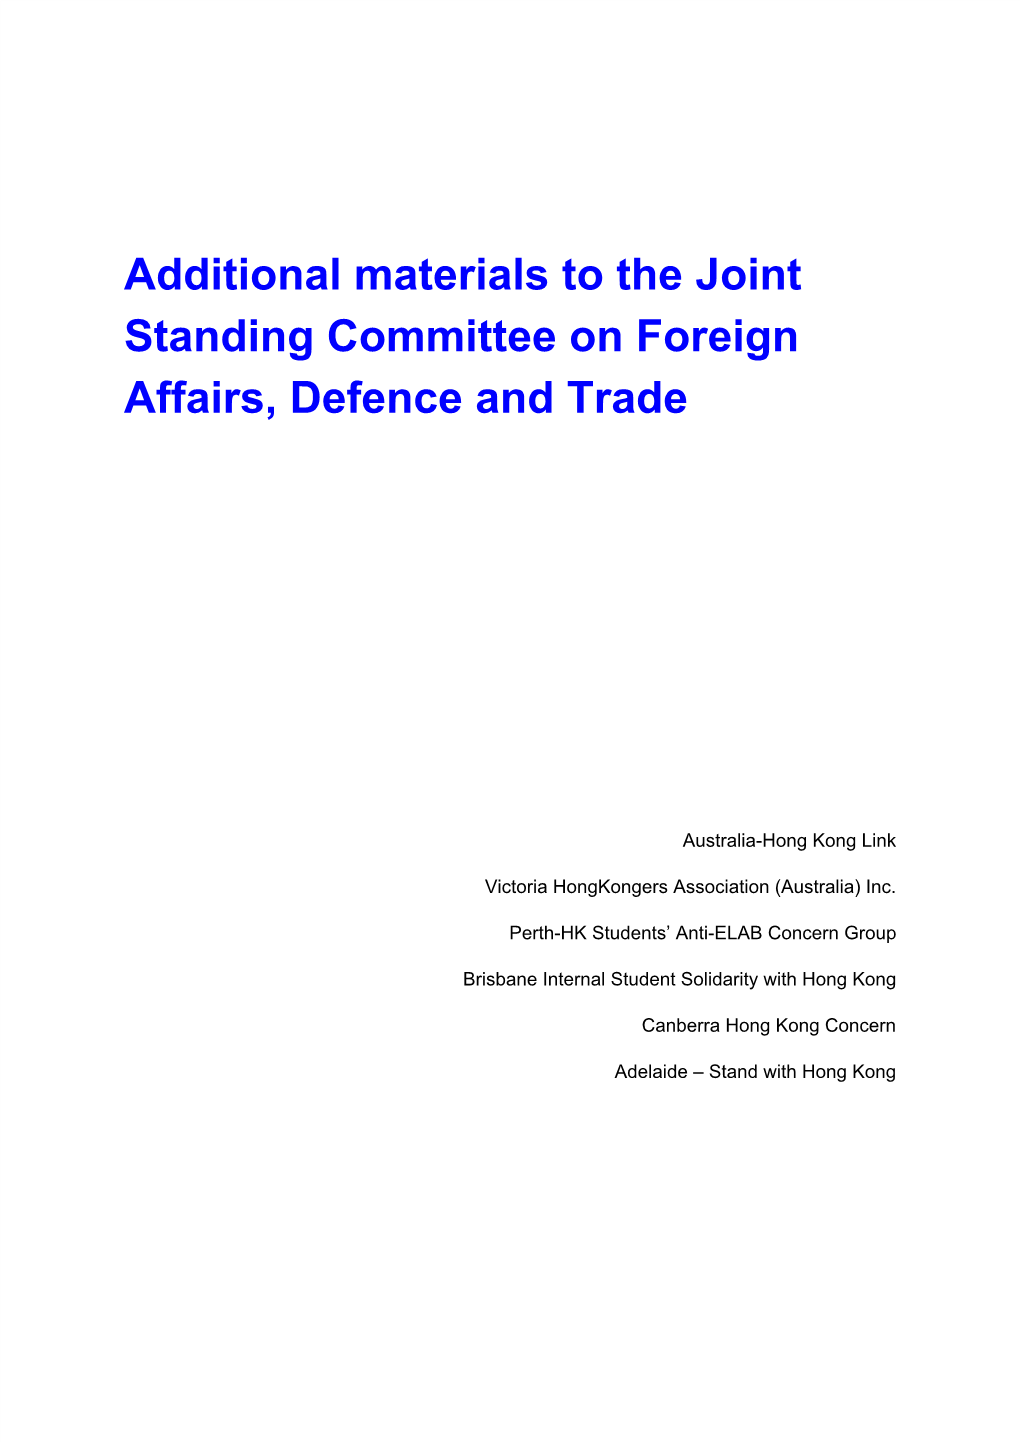 Additional Materials to the Joint Standing Committee on Foreign Affairs, Defence and Trade